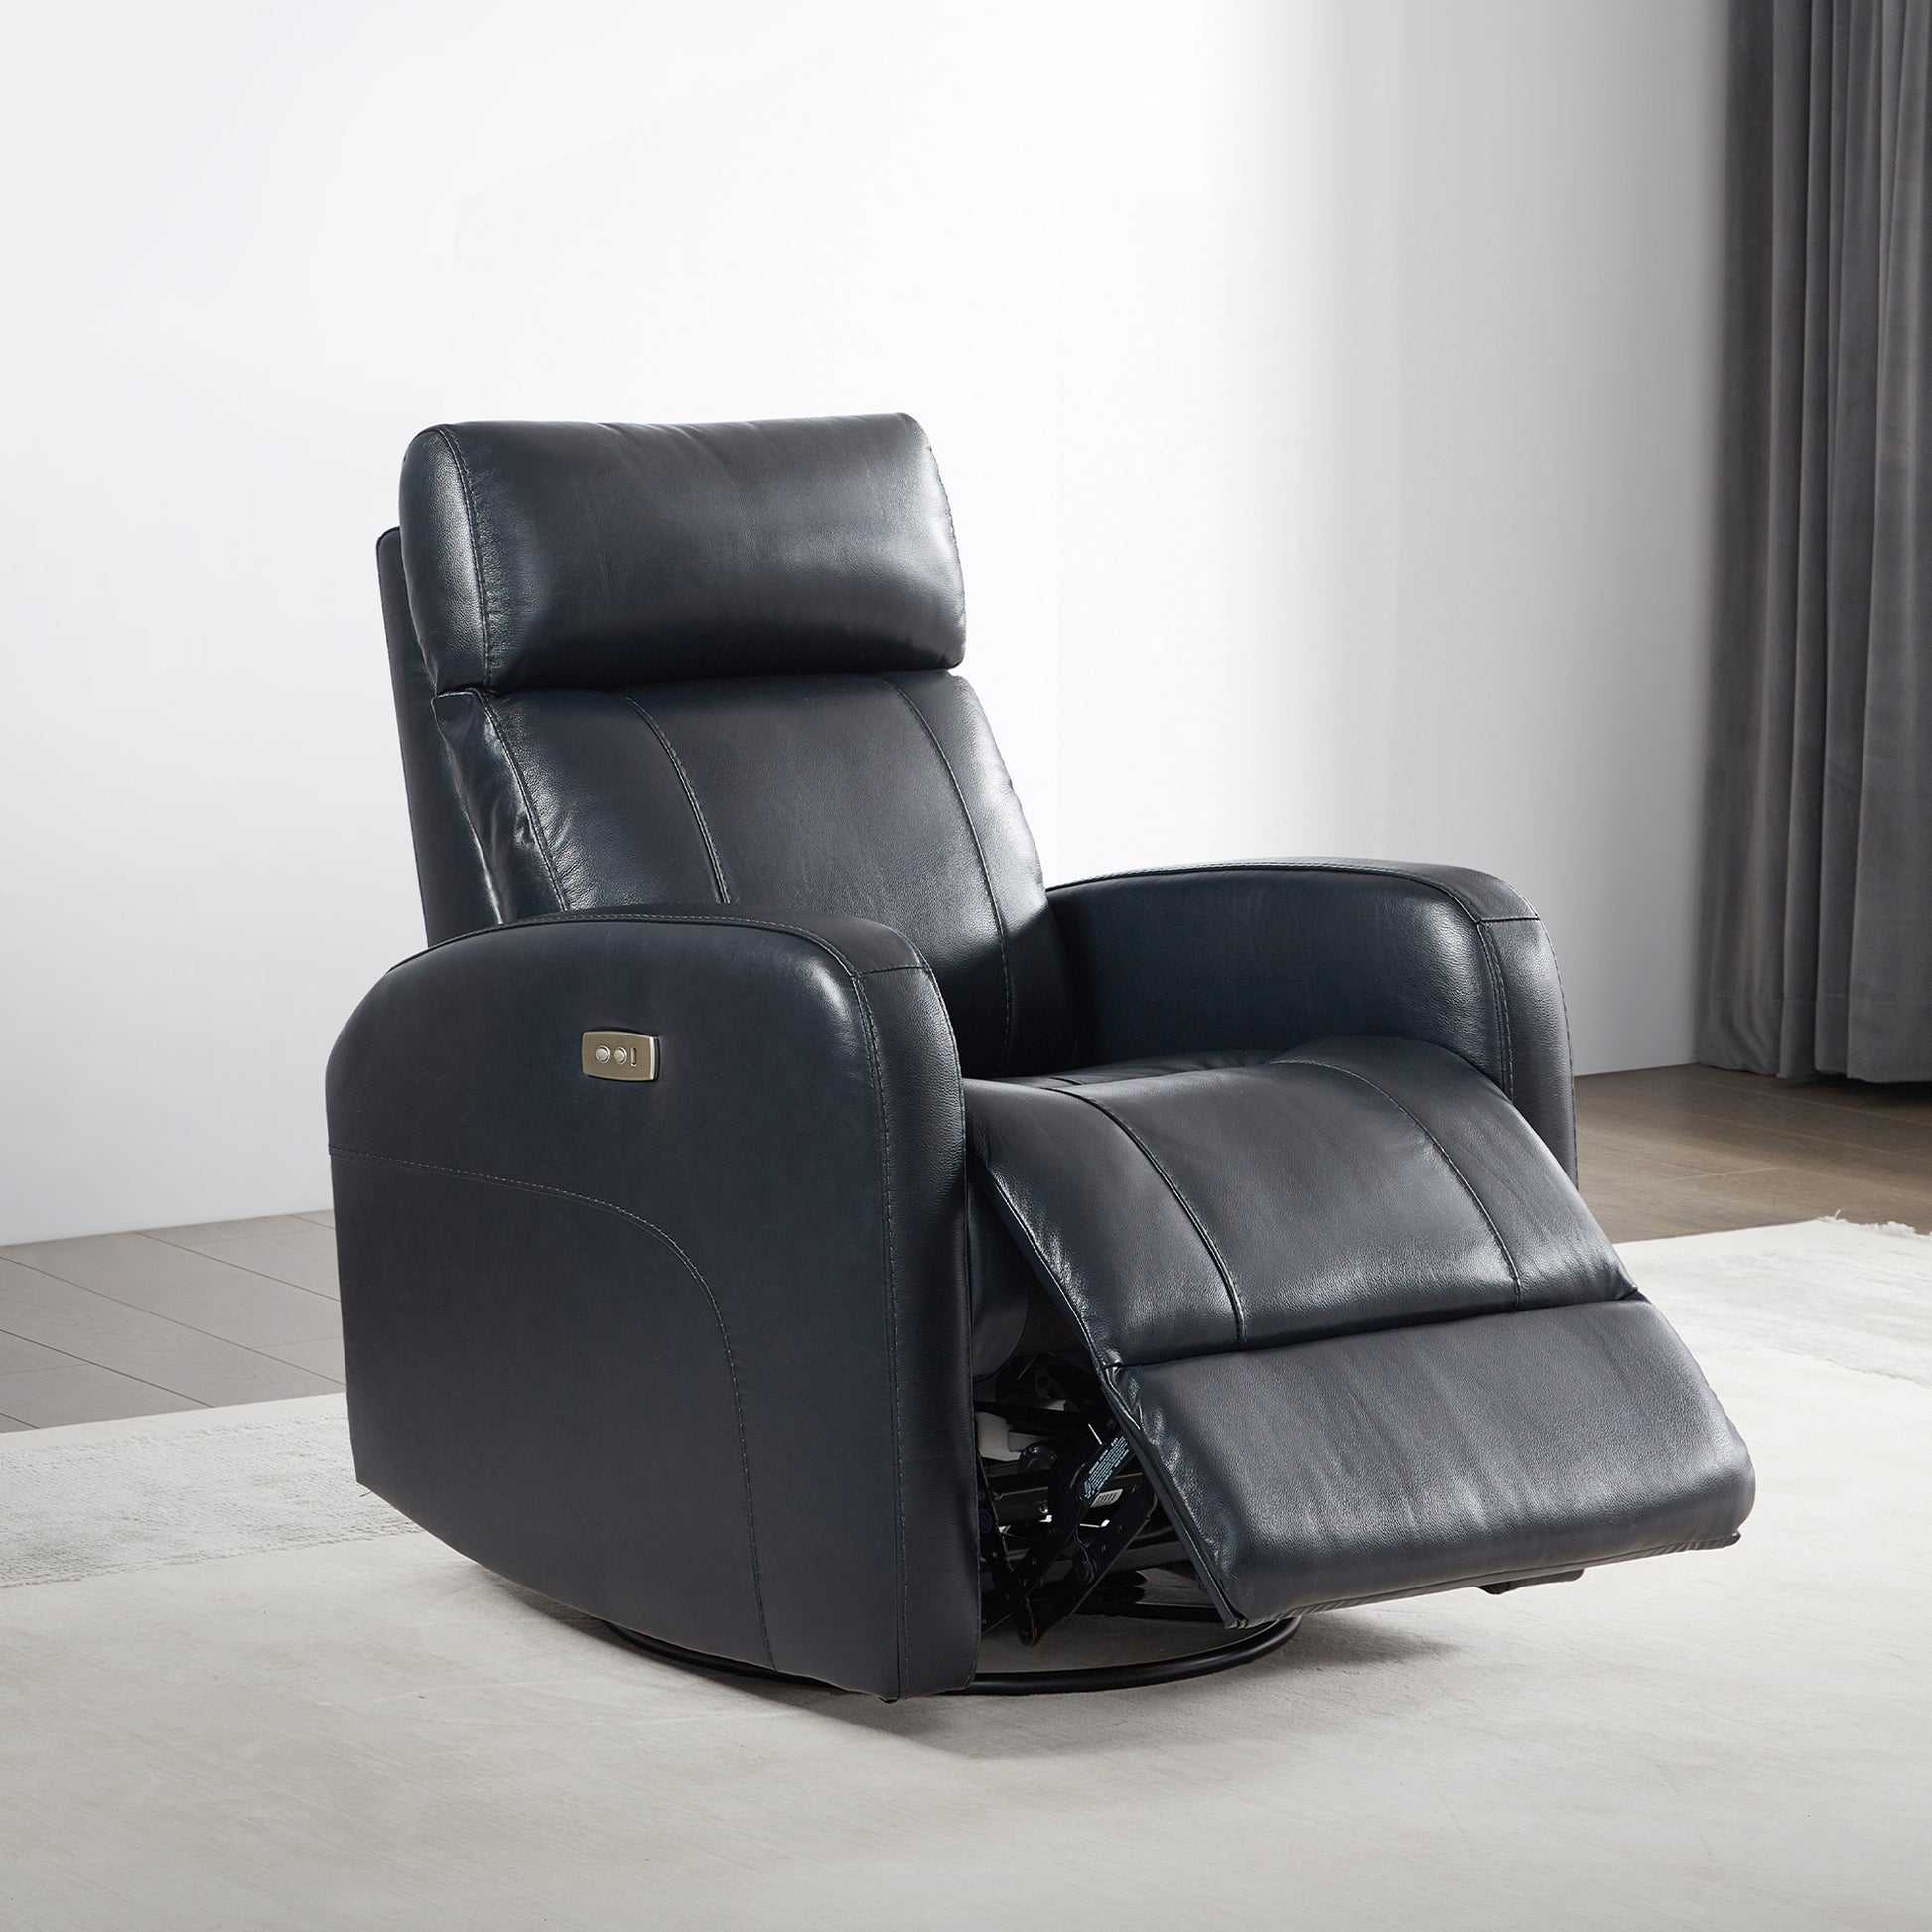 CHITA LIVING-Joy Power Swivel Recliner with Manual Headrest-Recliners-Genuine Leather-Navy-